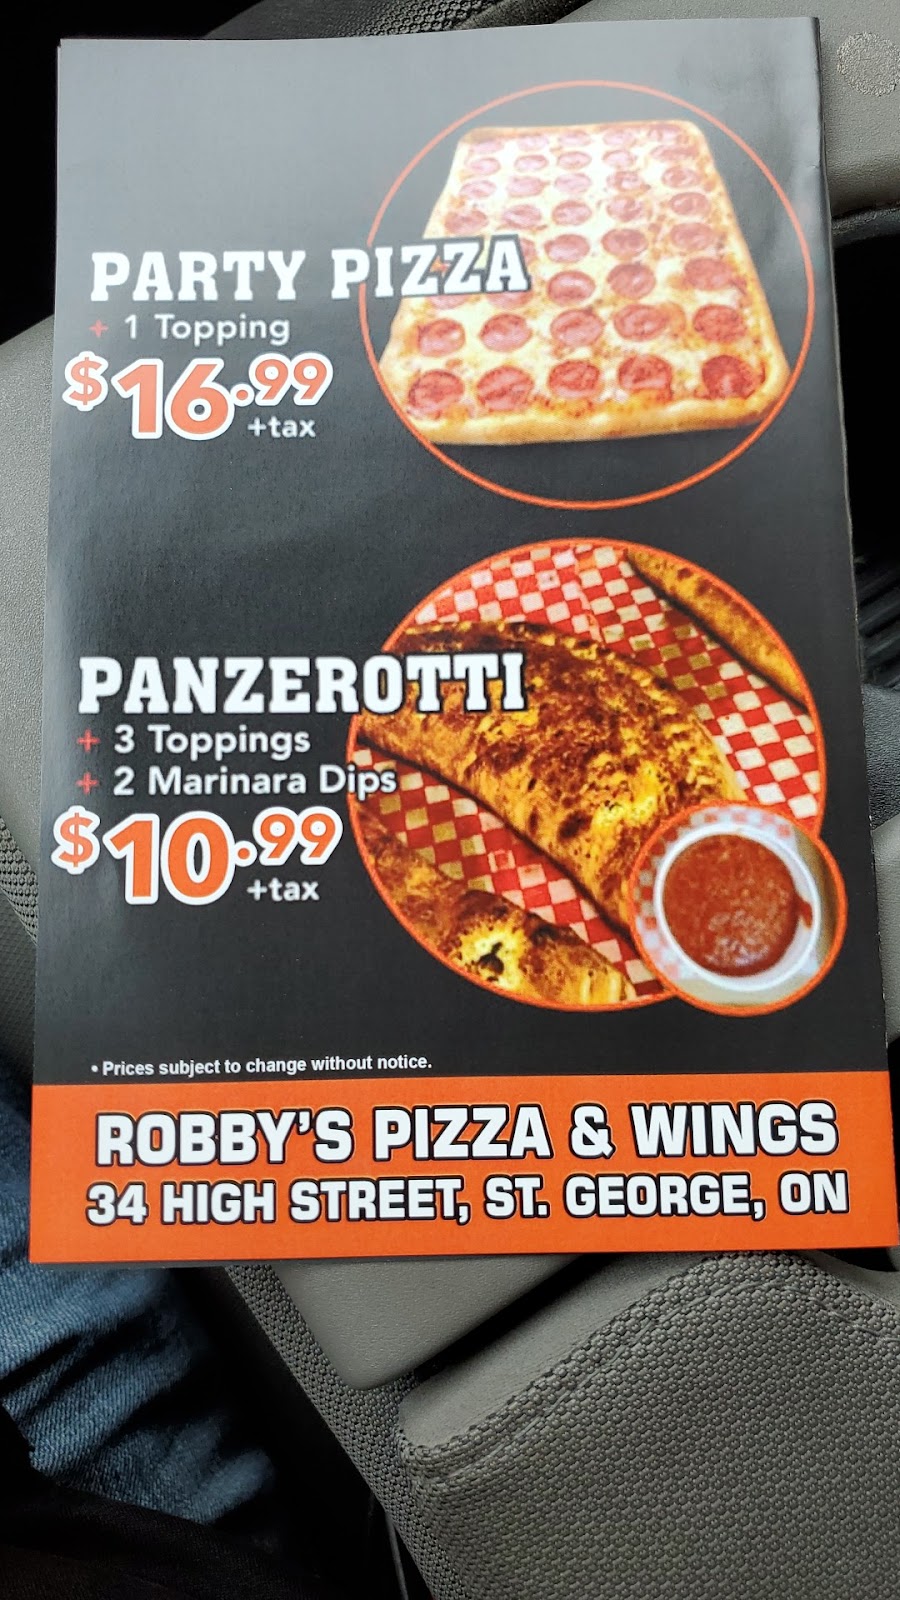 Robby’s pizza and wings | restaurant | 34 High St, Saint George, ON N0E 1N0, Canada | 5194481990 OR +1 519-448-1990